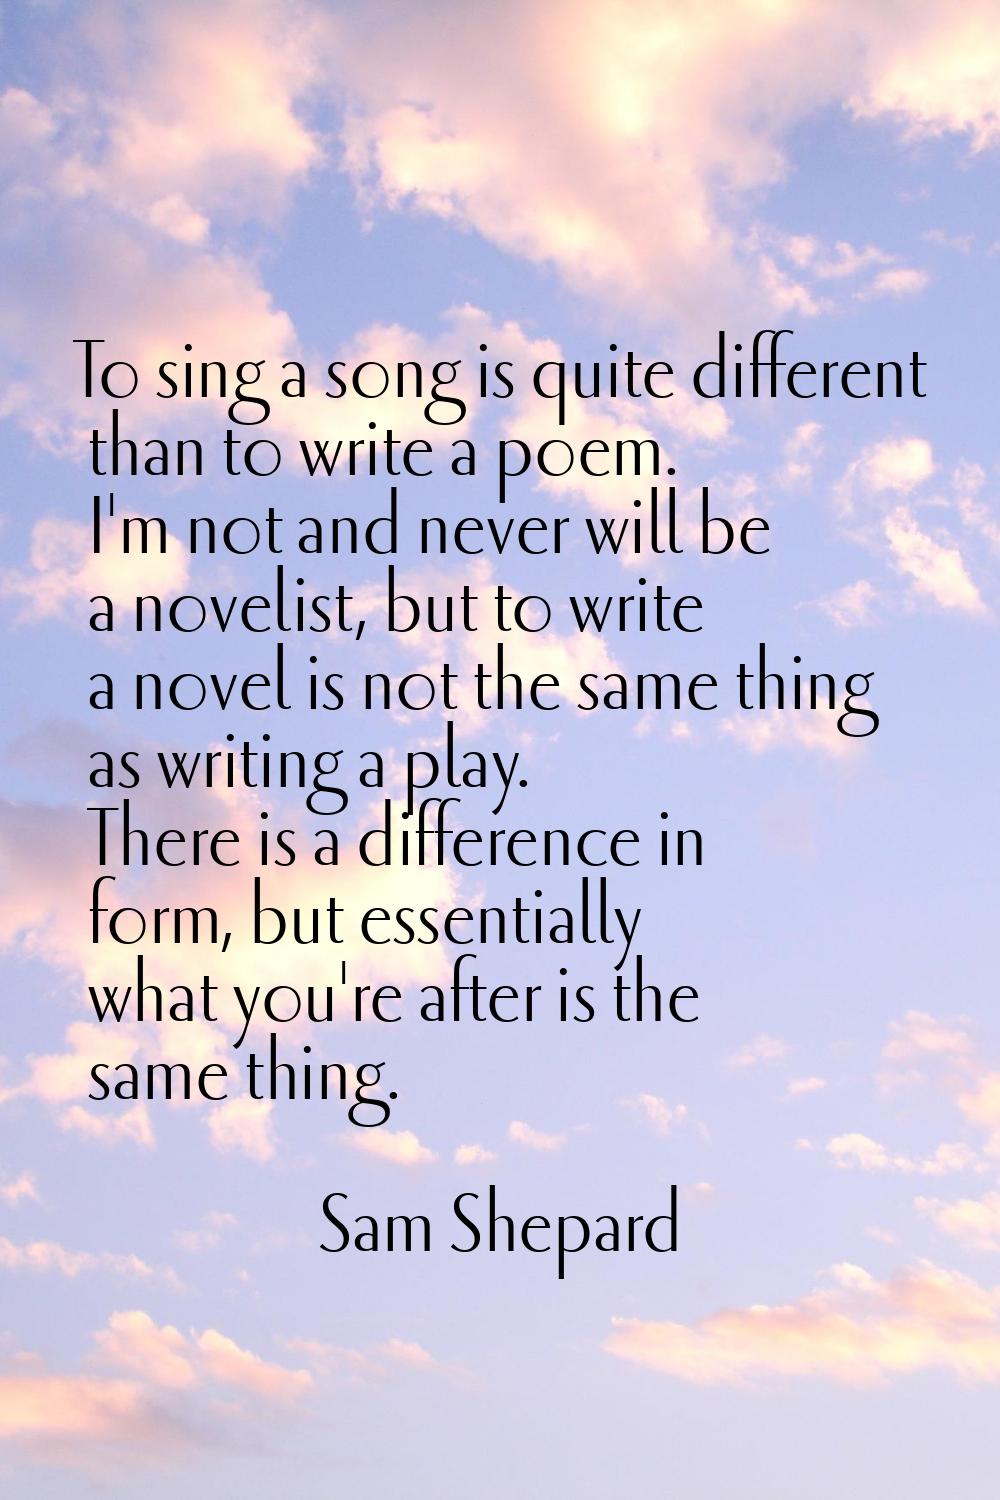 To sing a song is quite different than to write a poem. I'm not and never will be a novelist, but t